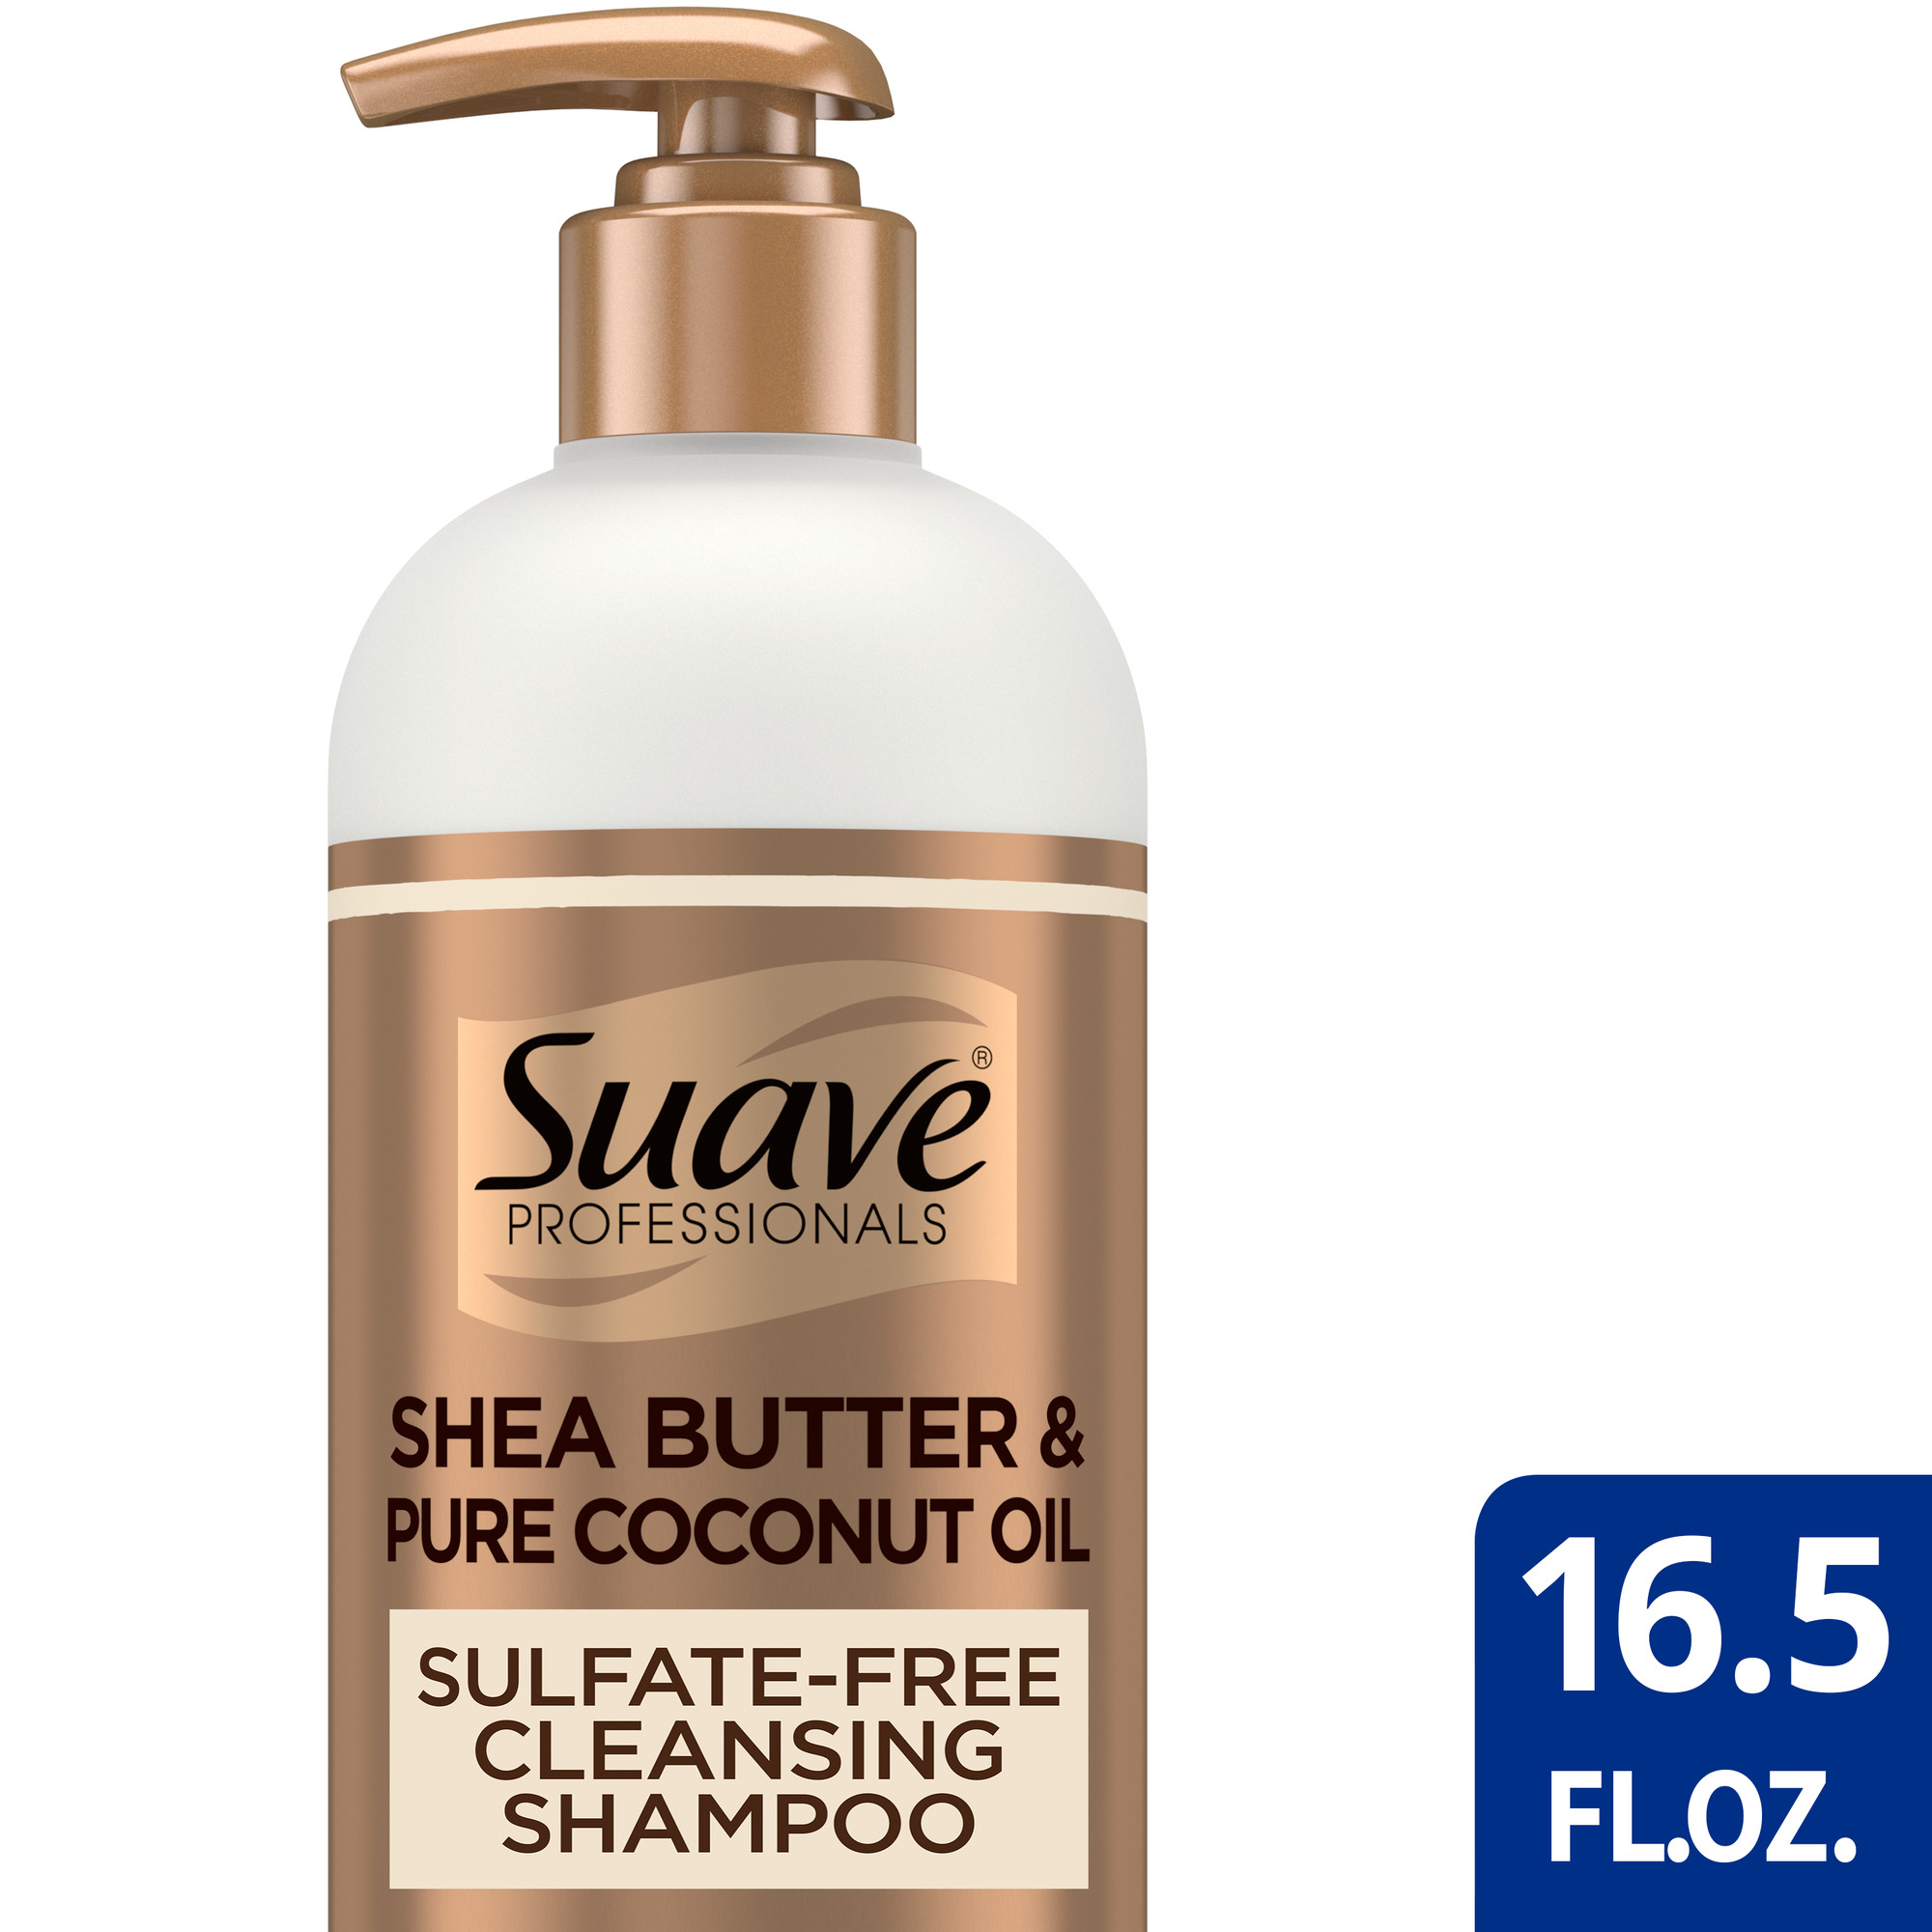 Suave Professionals Hair Shampoo Sulfate-Free Shea Butter and Coconut Oil, 16.5 - Walmart.com